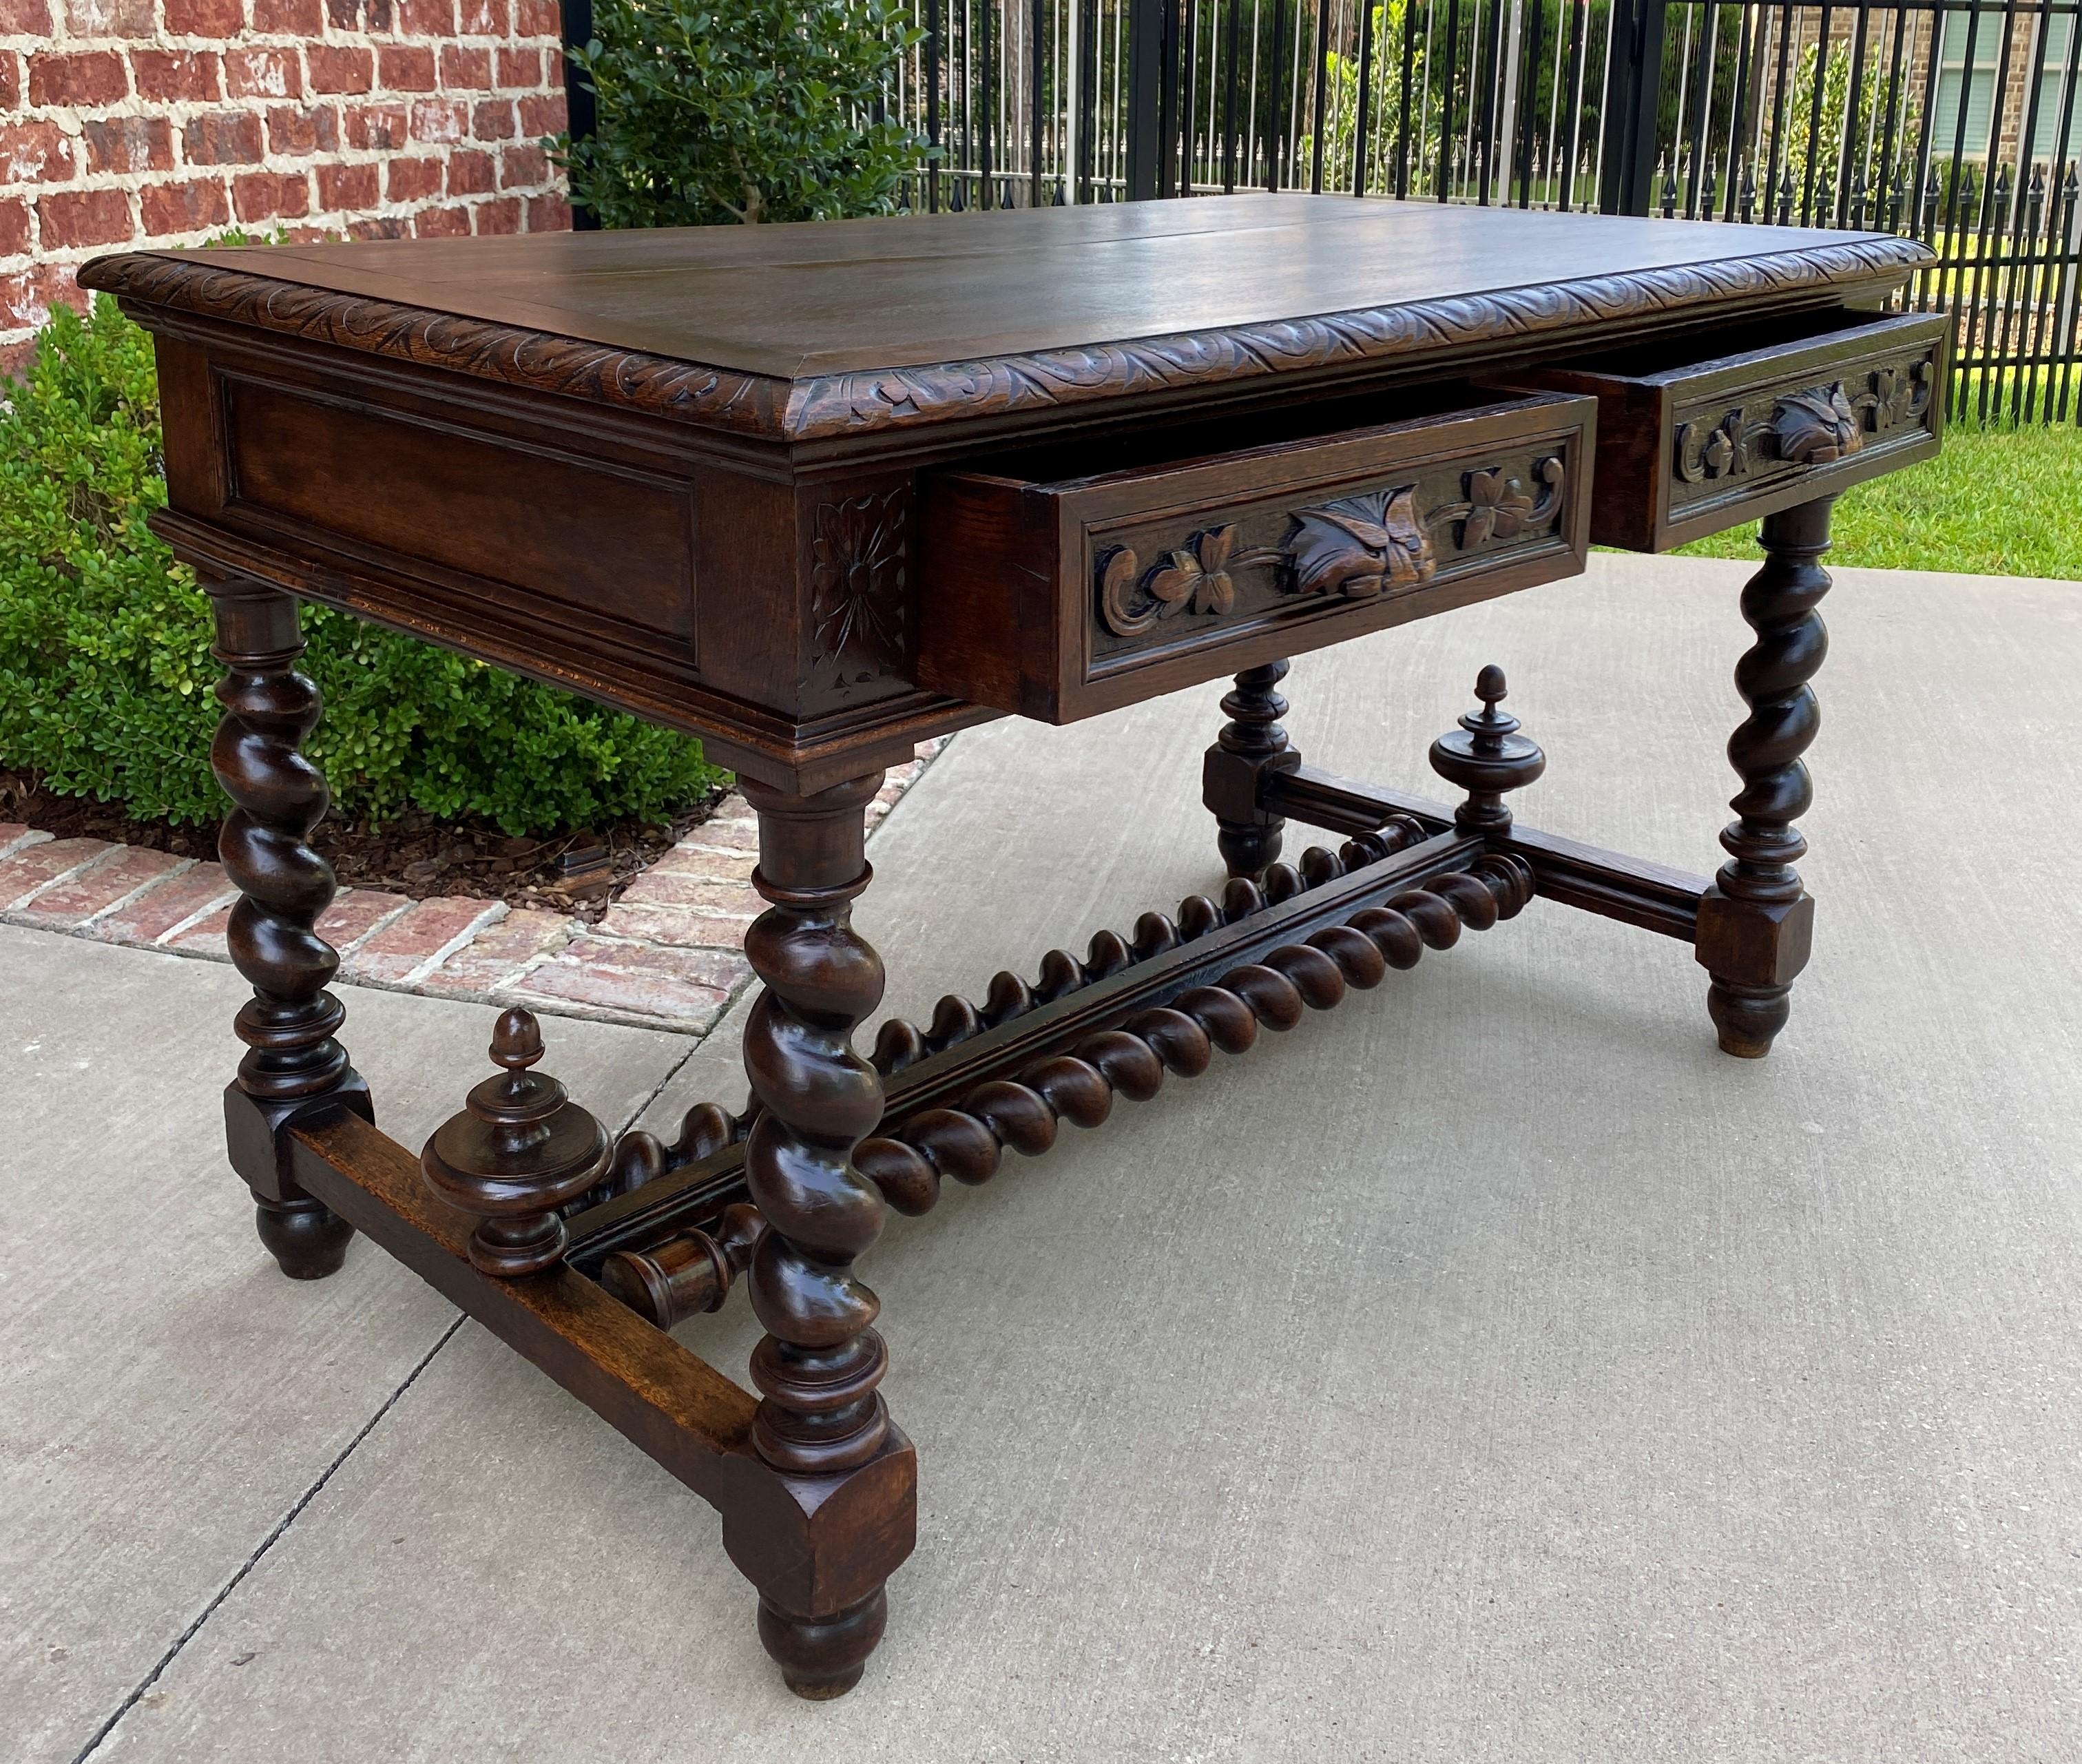 19th Century Antique French Desk Table with Drawers Oak Barley Twist Library Study Office 19C